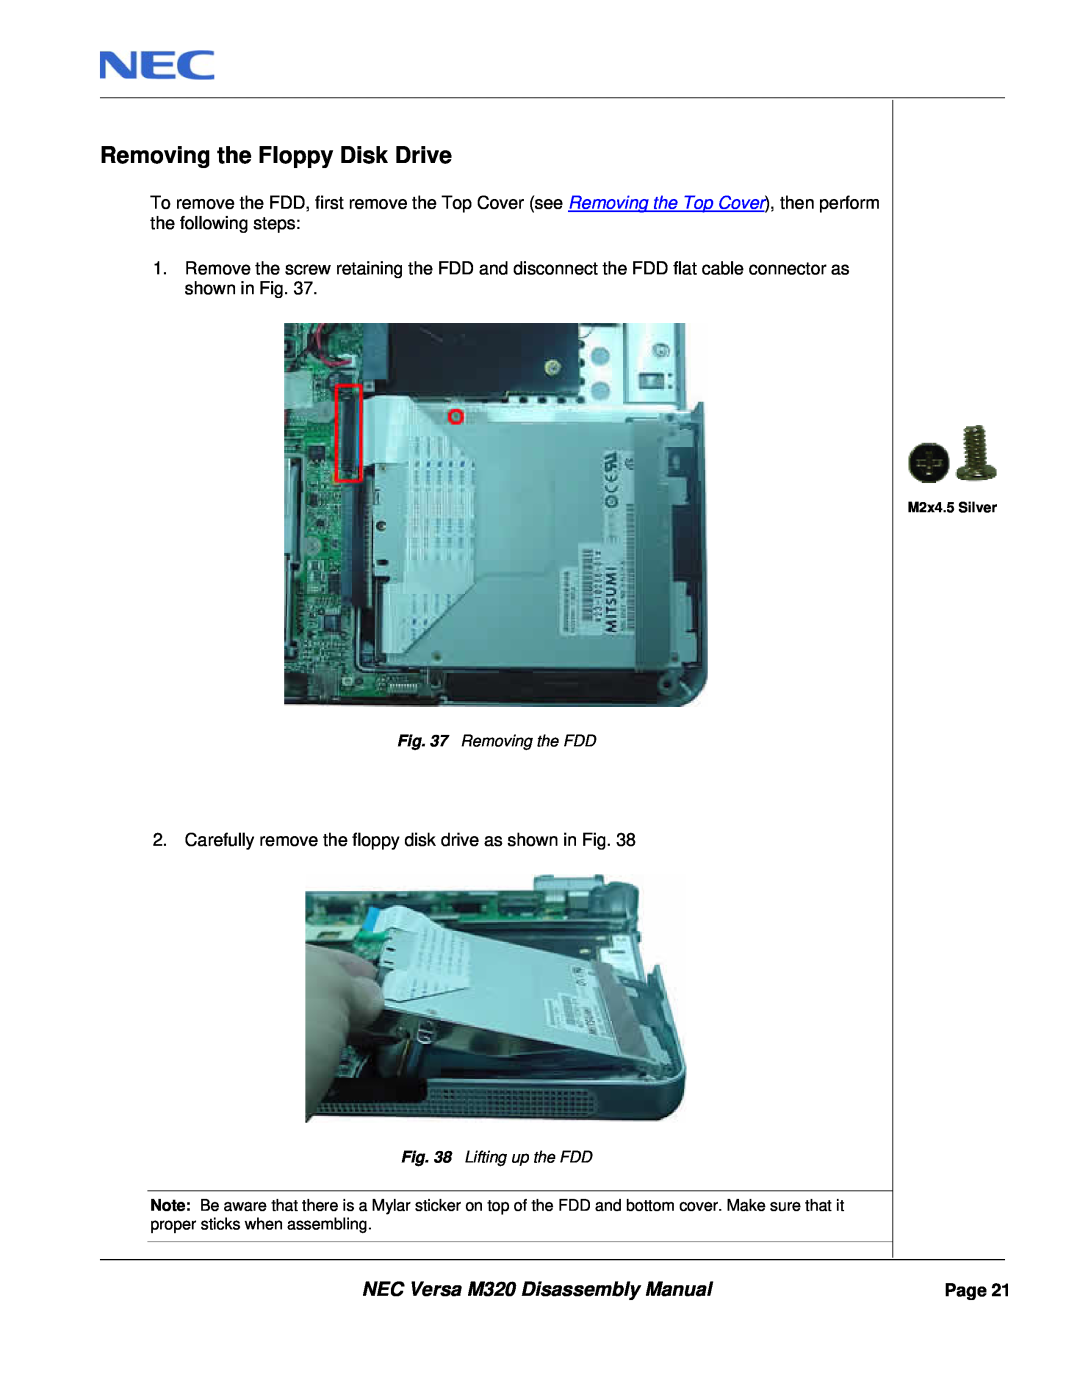 NEC manual Removing the Floppy Disk Drive, NEC Versa M320 Disassembly Manual, Removing the FDD, Lifting up the FDD 